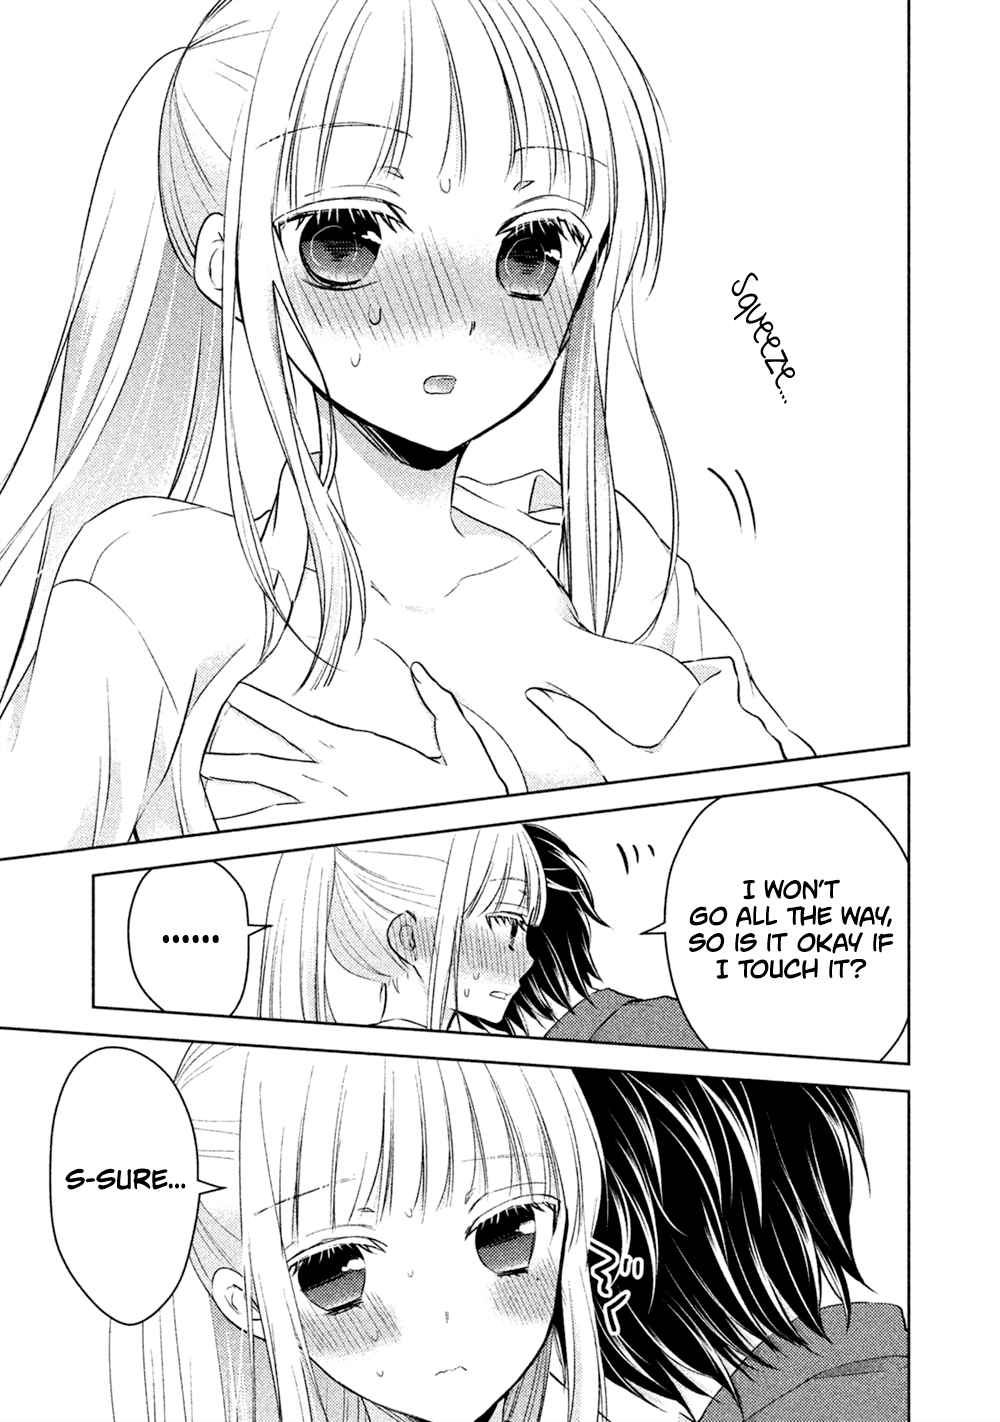 We May Be An Inexperienced Couple But... Vol. 3 Ch. 21 Isolated Room